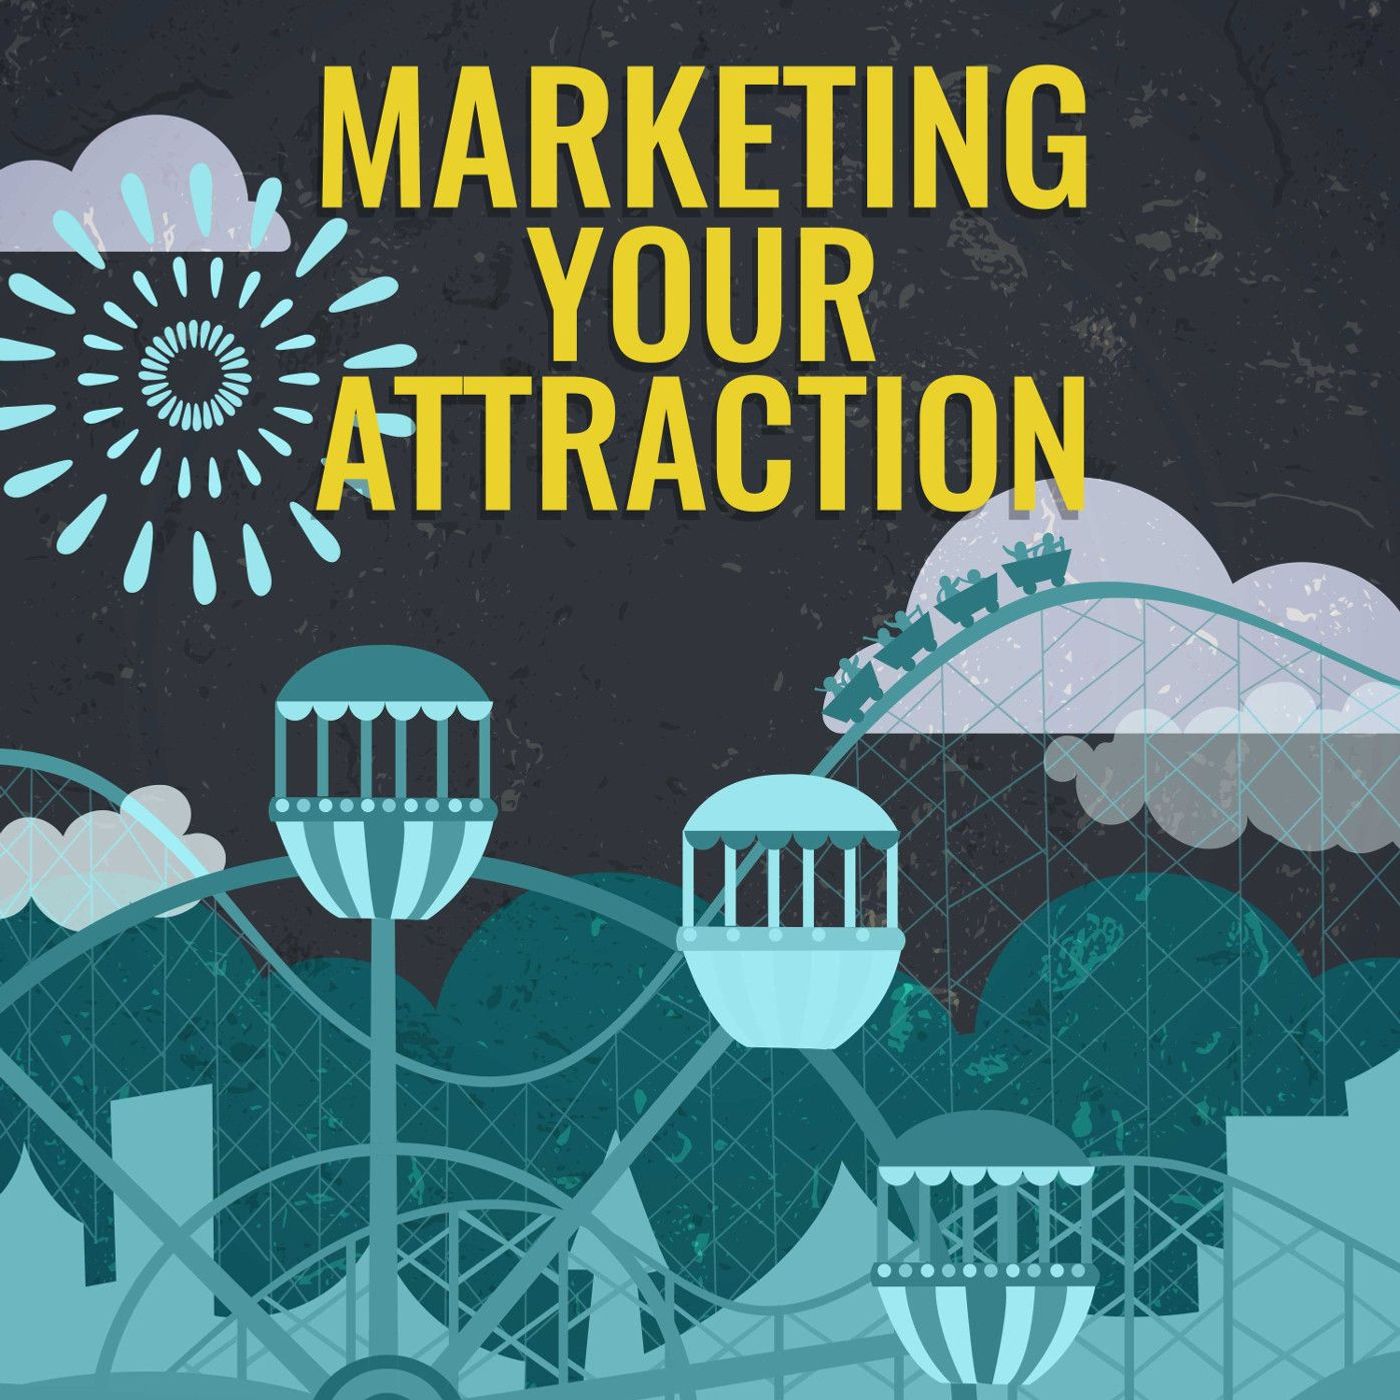 How do you use retargeting? The cornerstone conversion tactic for your attraction explained.